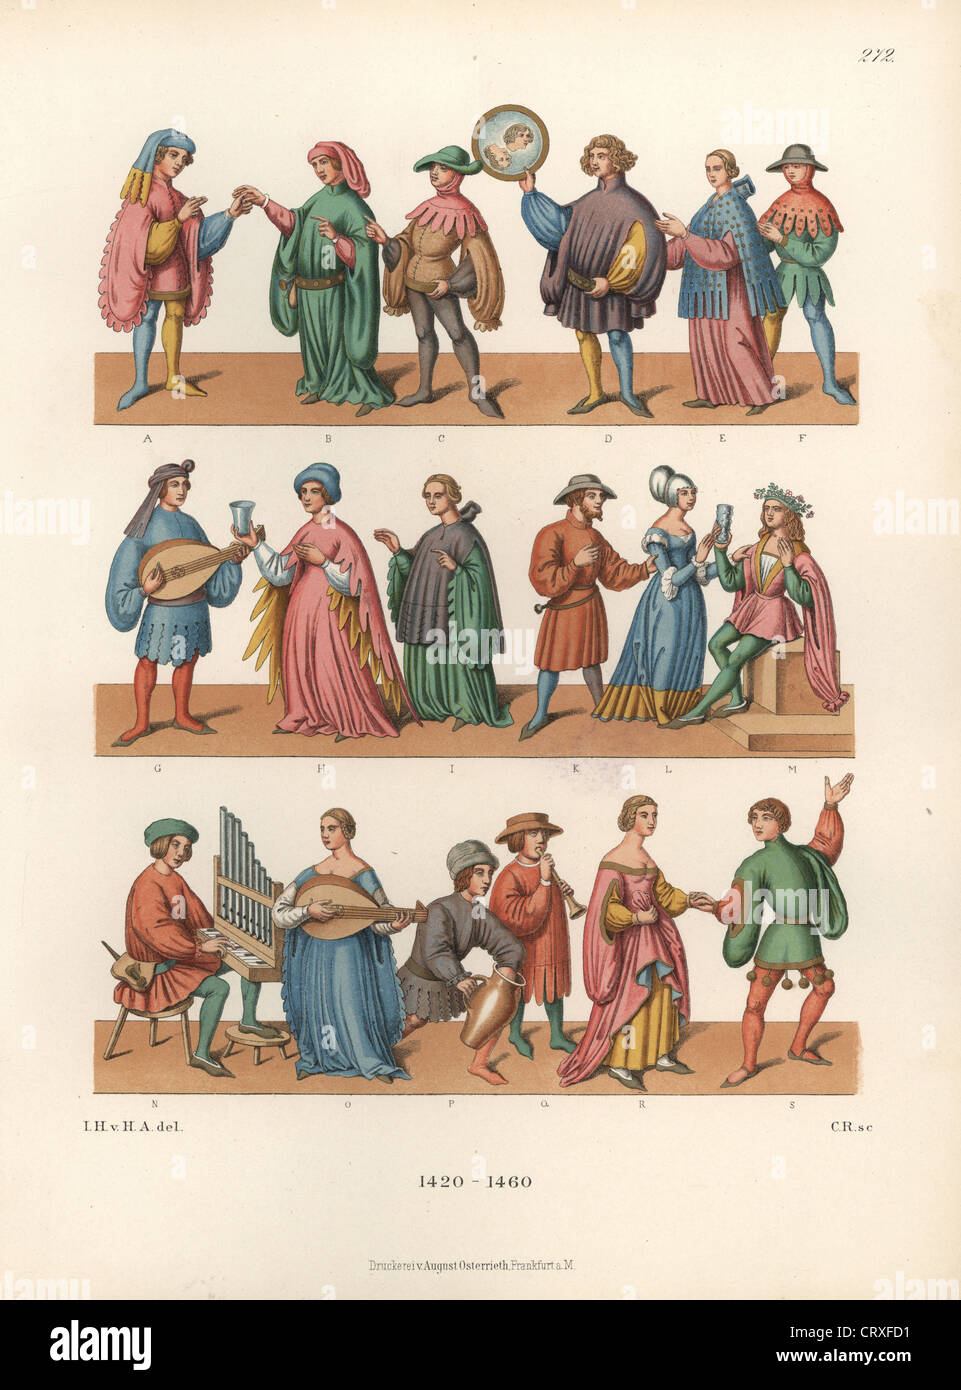 Fashions from the mid 15th century showing a doctor, musicians playing lutes and spinets, servants, dancers and drinkers Stock Photo